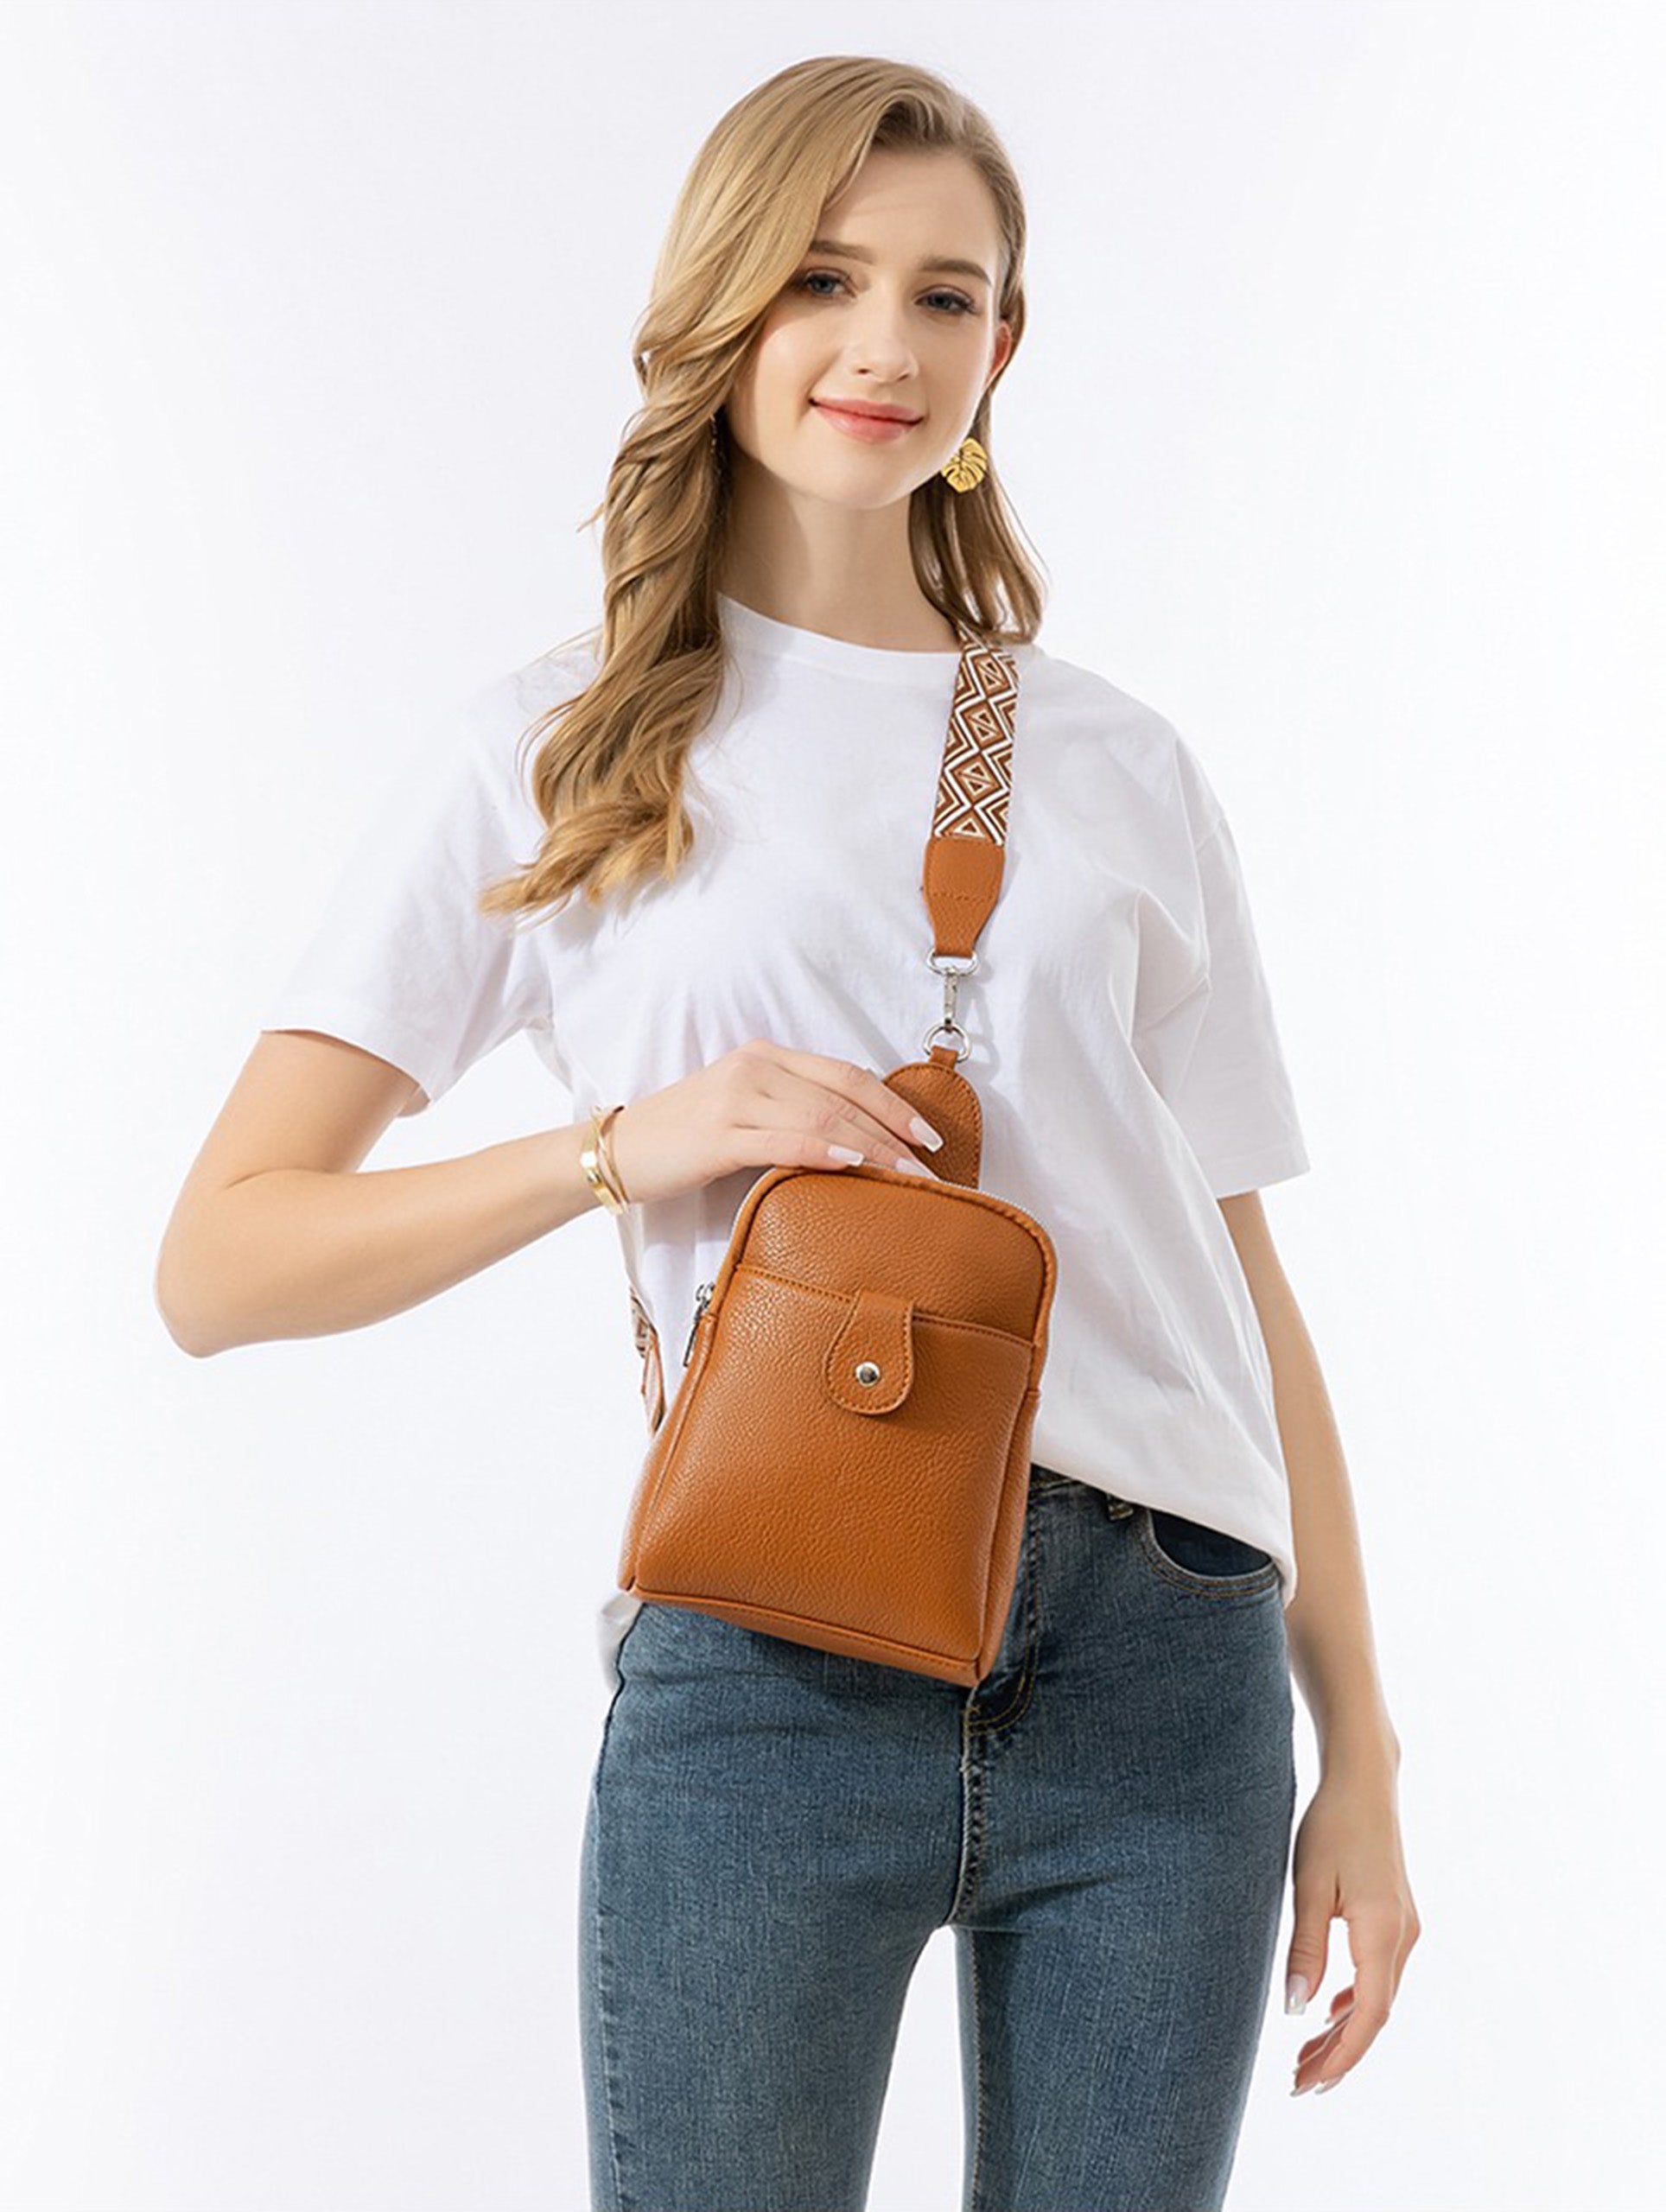 PRETTYMS Small Sling Bag For Women Vegan Leather Fashionable Fanny Pack Crossbody Bags For Women Chest Bag For Travel